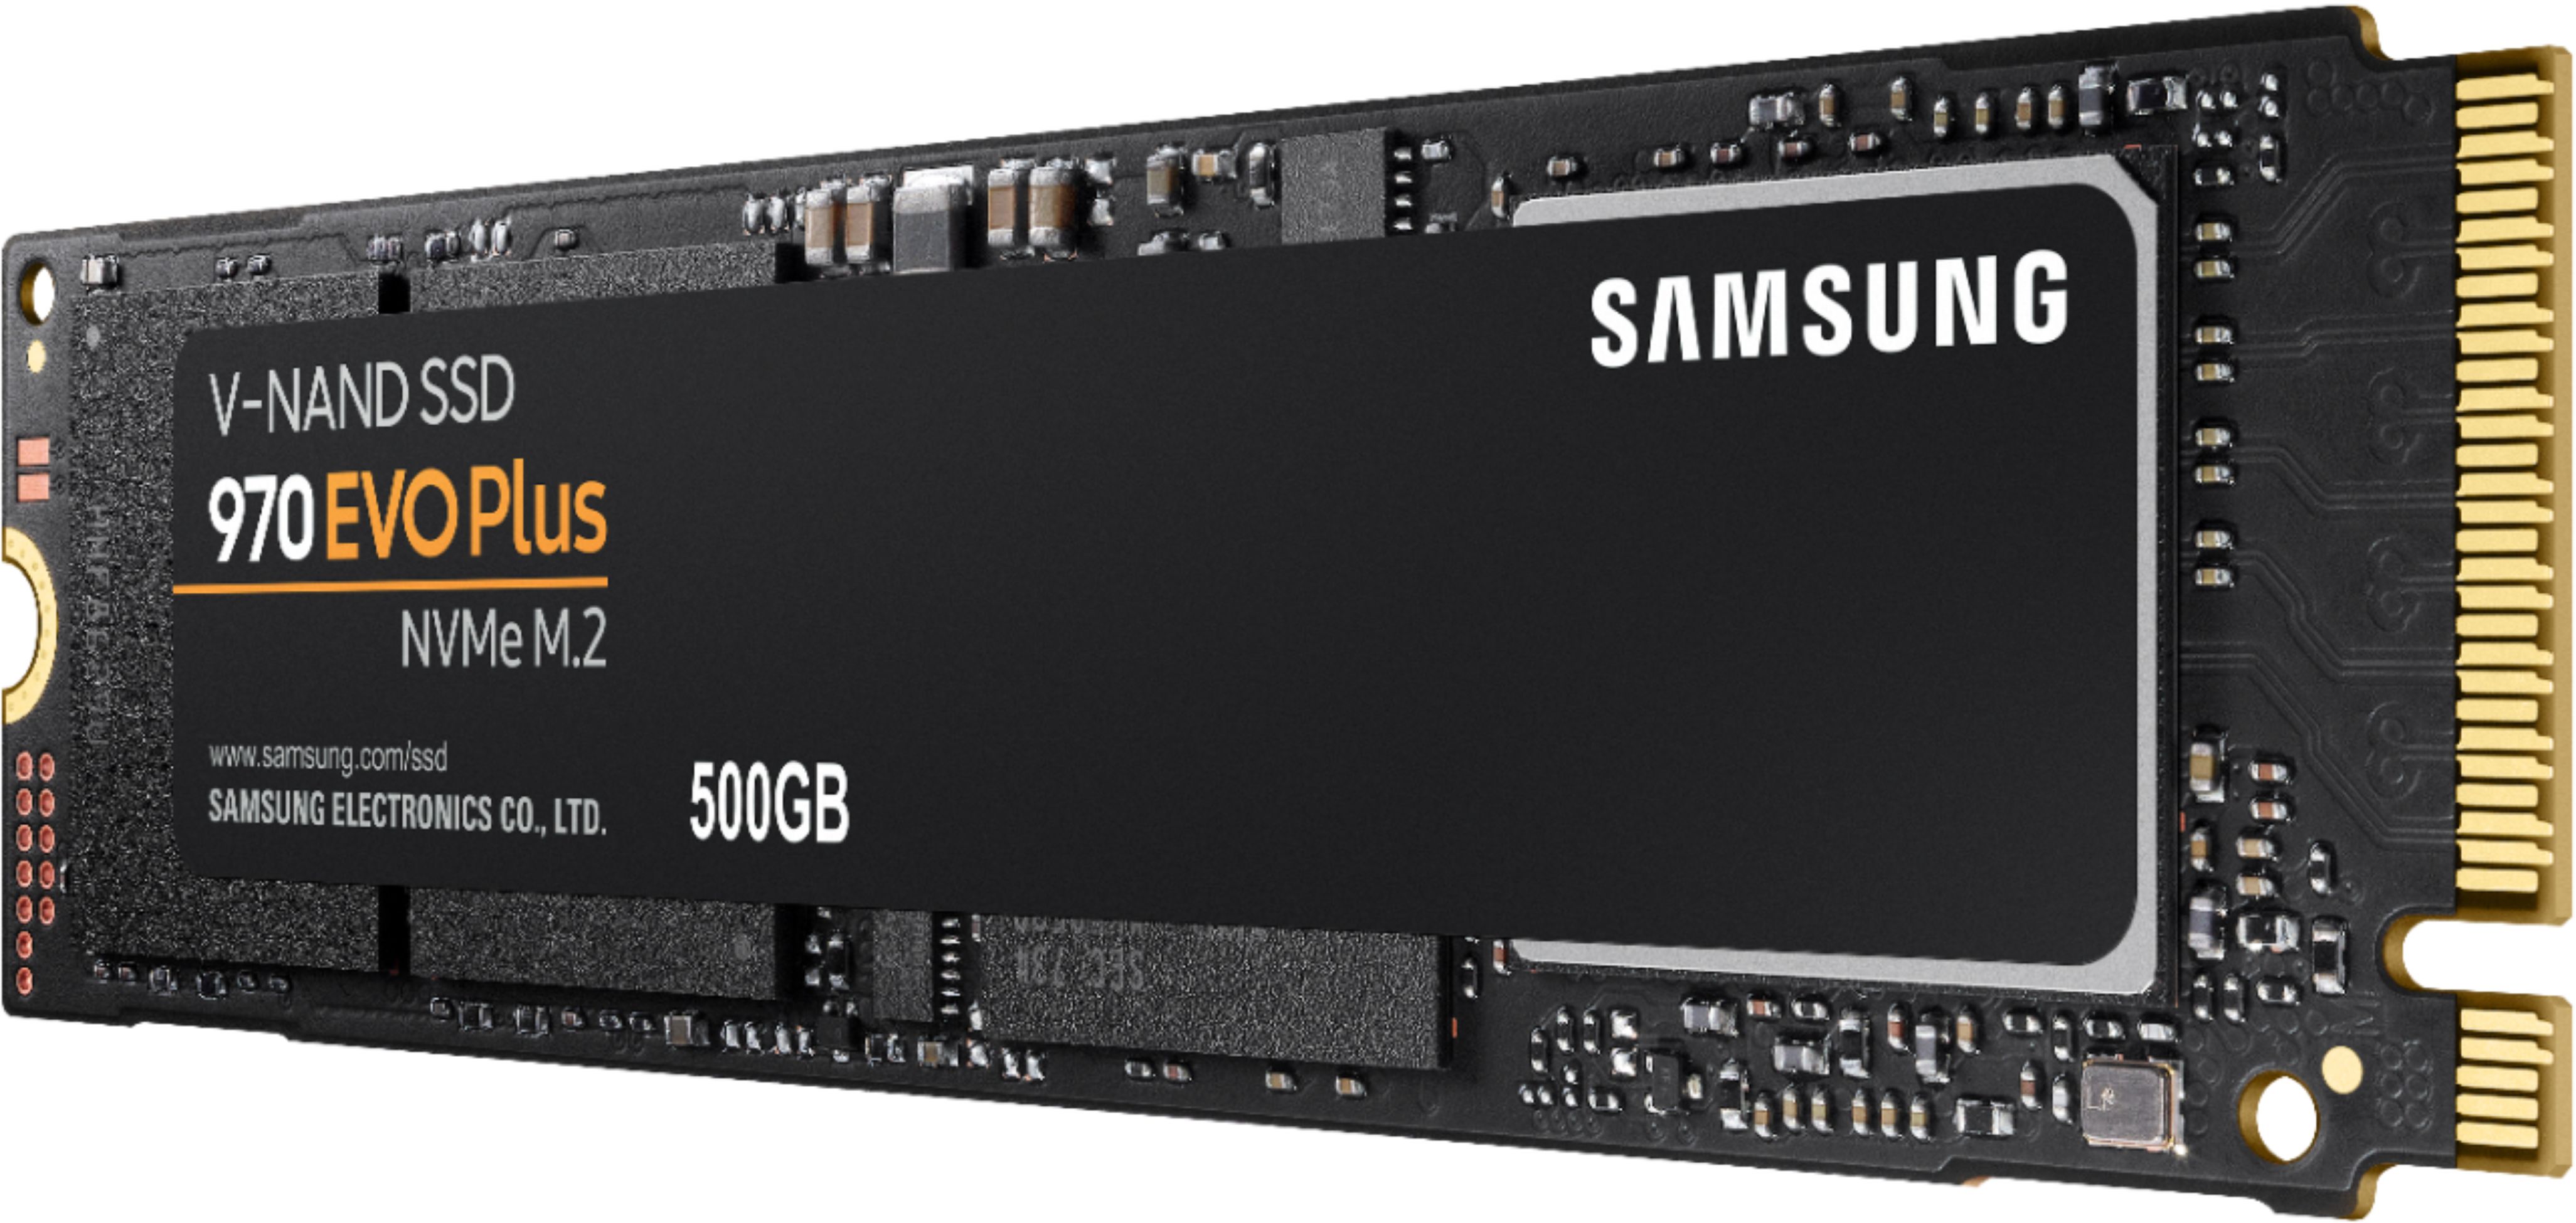 Samsung 970 EVO Plus 500GB PCIe Gen 3 x4 NVMe Internal Solid State Drive with V-NAND Technology MZ-V7S500BAM - Best Buy